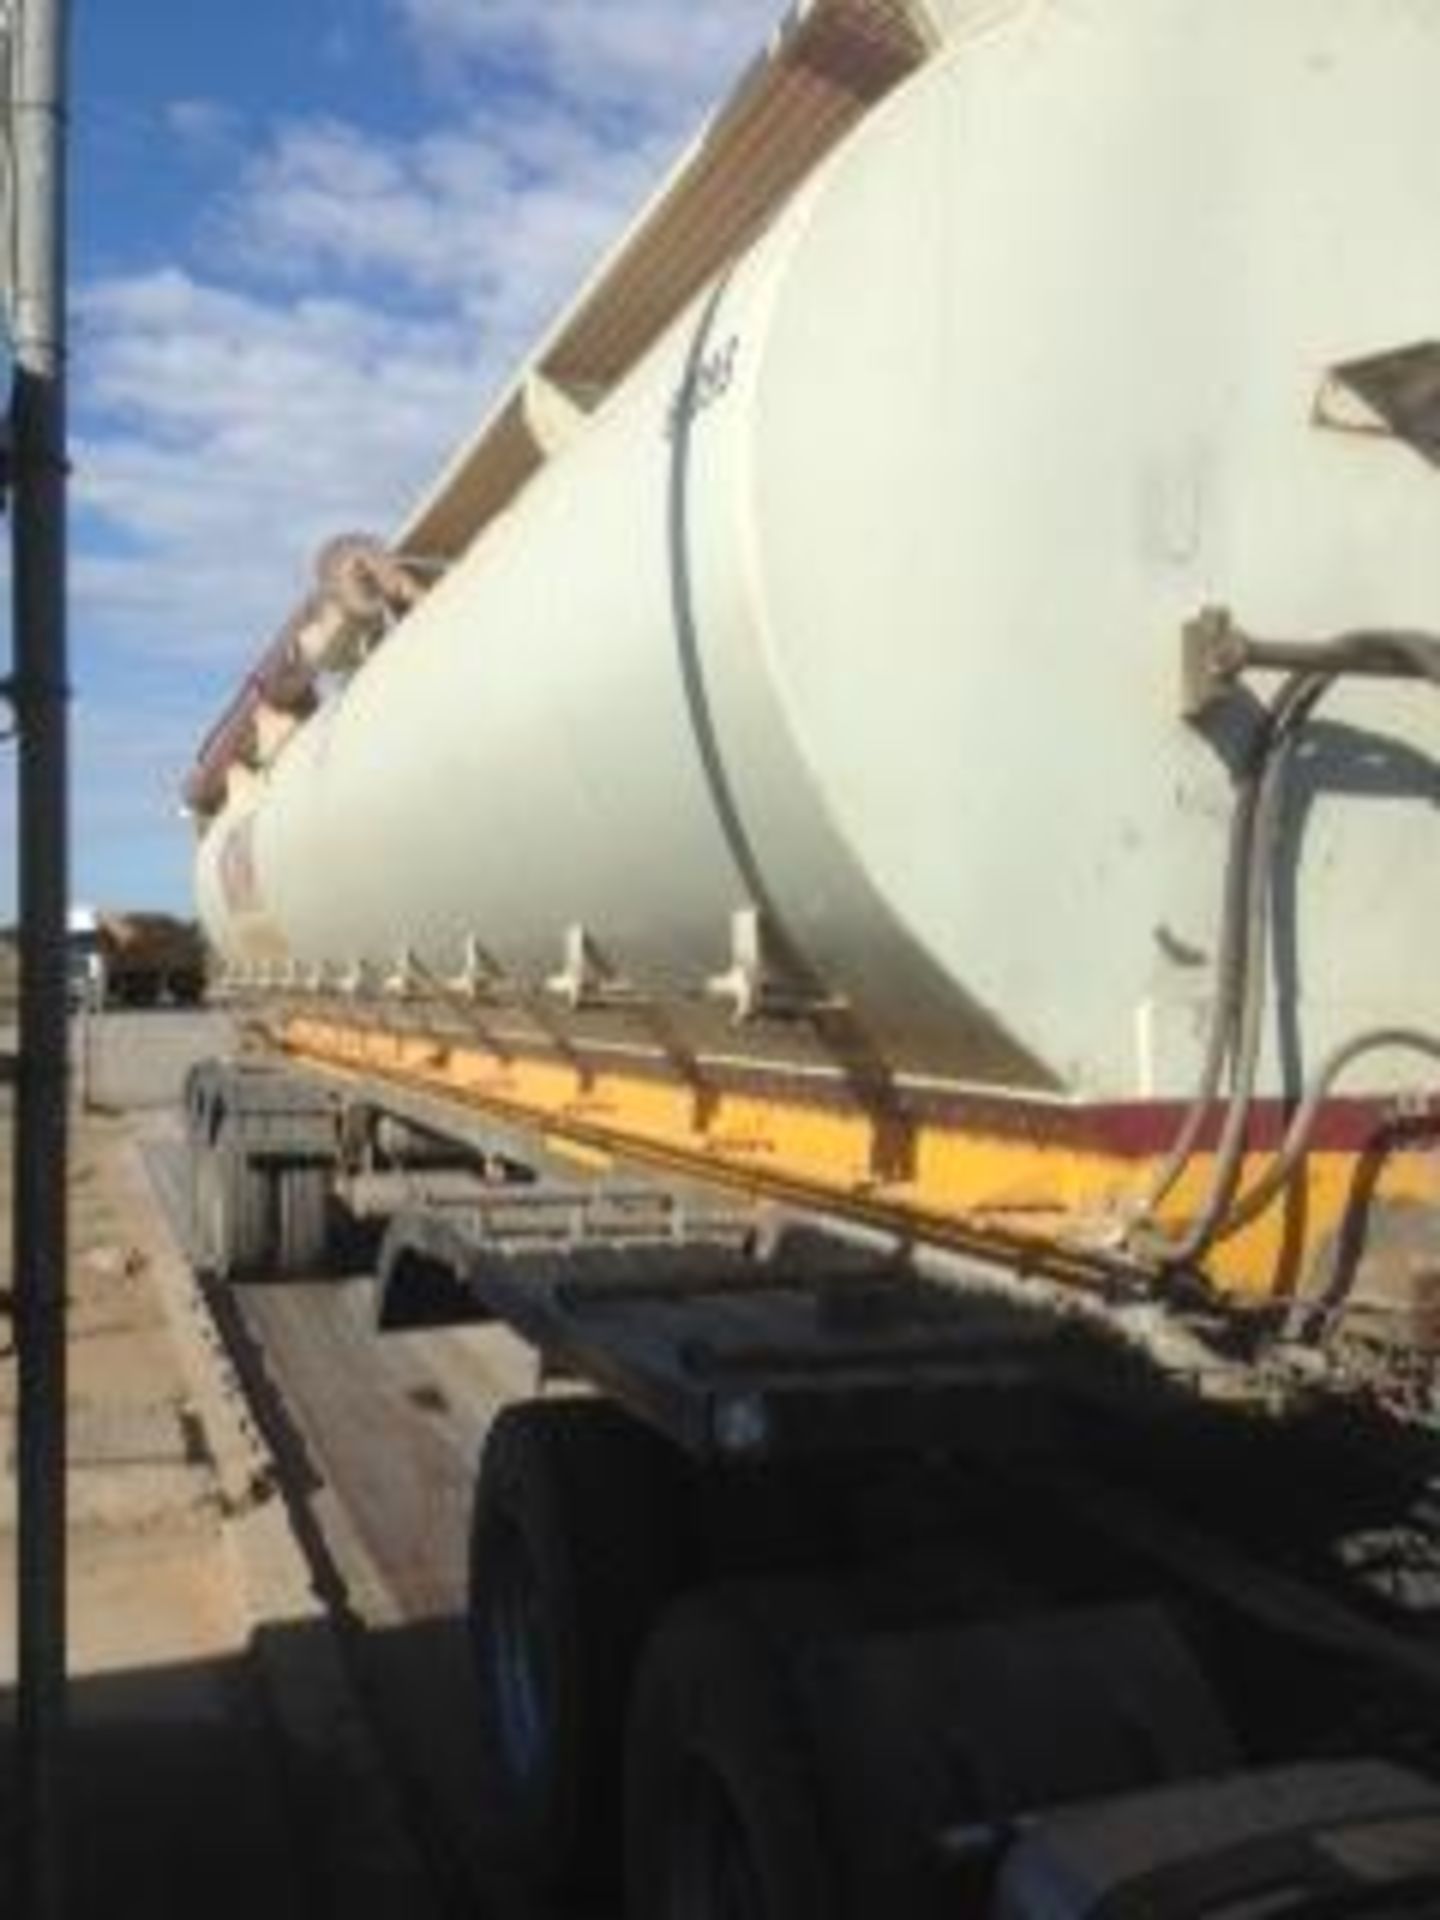 2008 AUGER TRI-AXLE AUGER BULK TANKER TRAILER CK19730 - Subject to Confirmation - Image 2 of 5